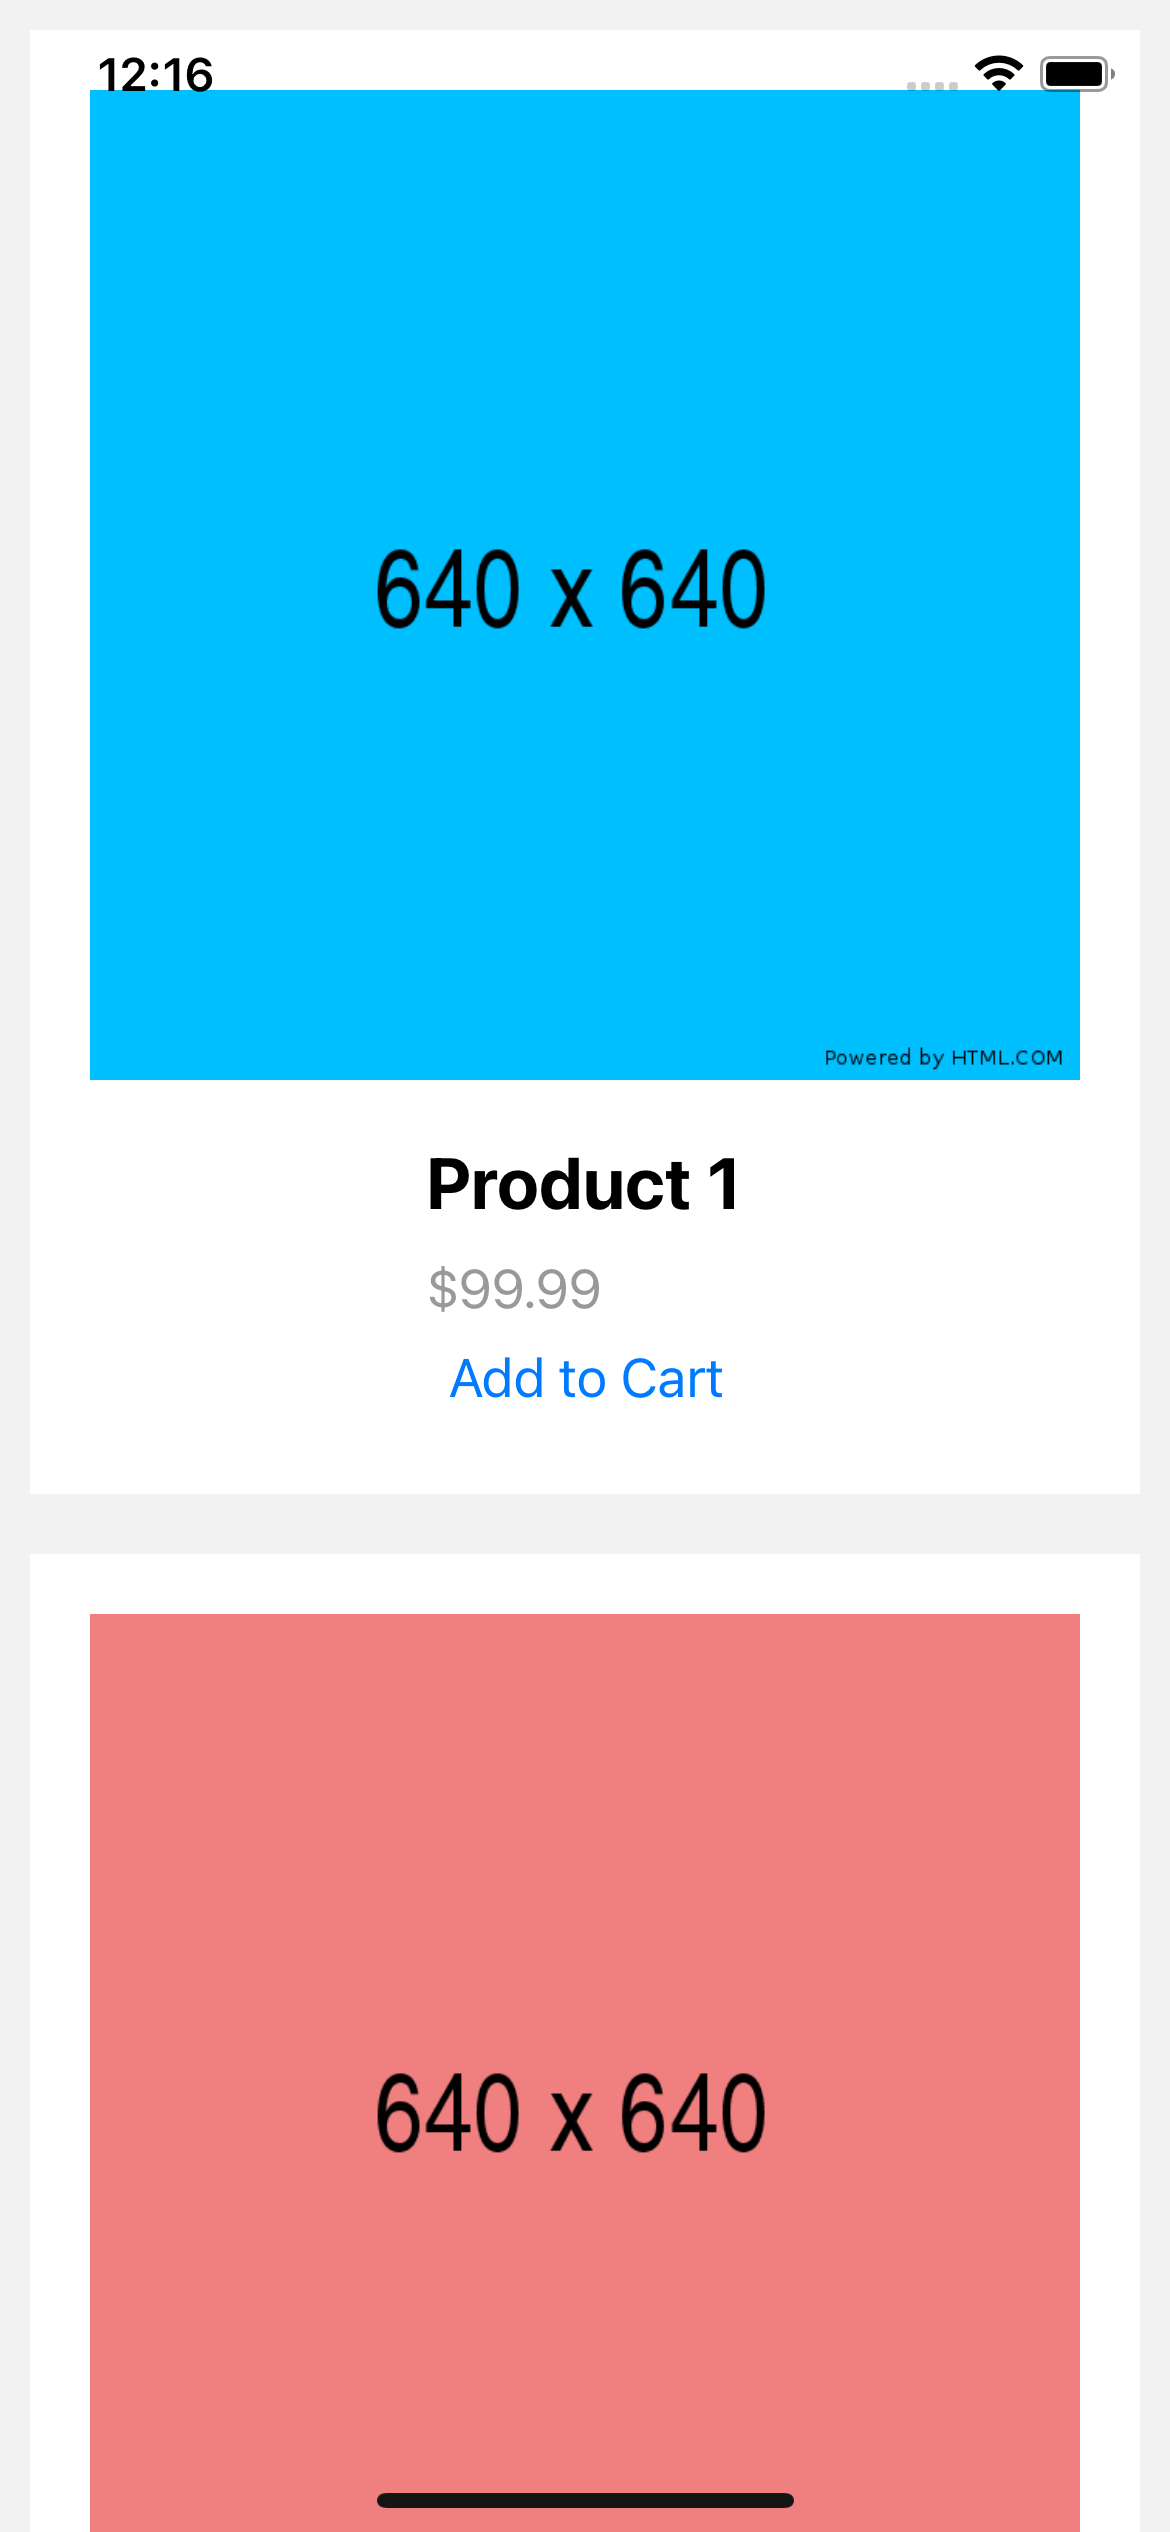 React native template. Simple product list